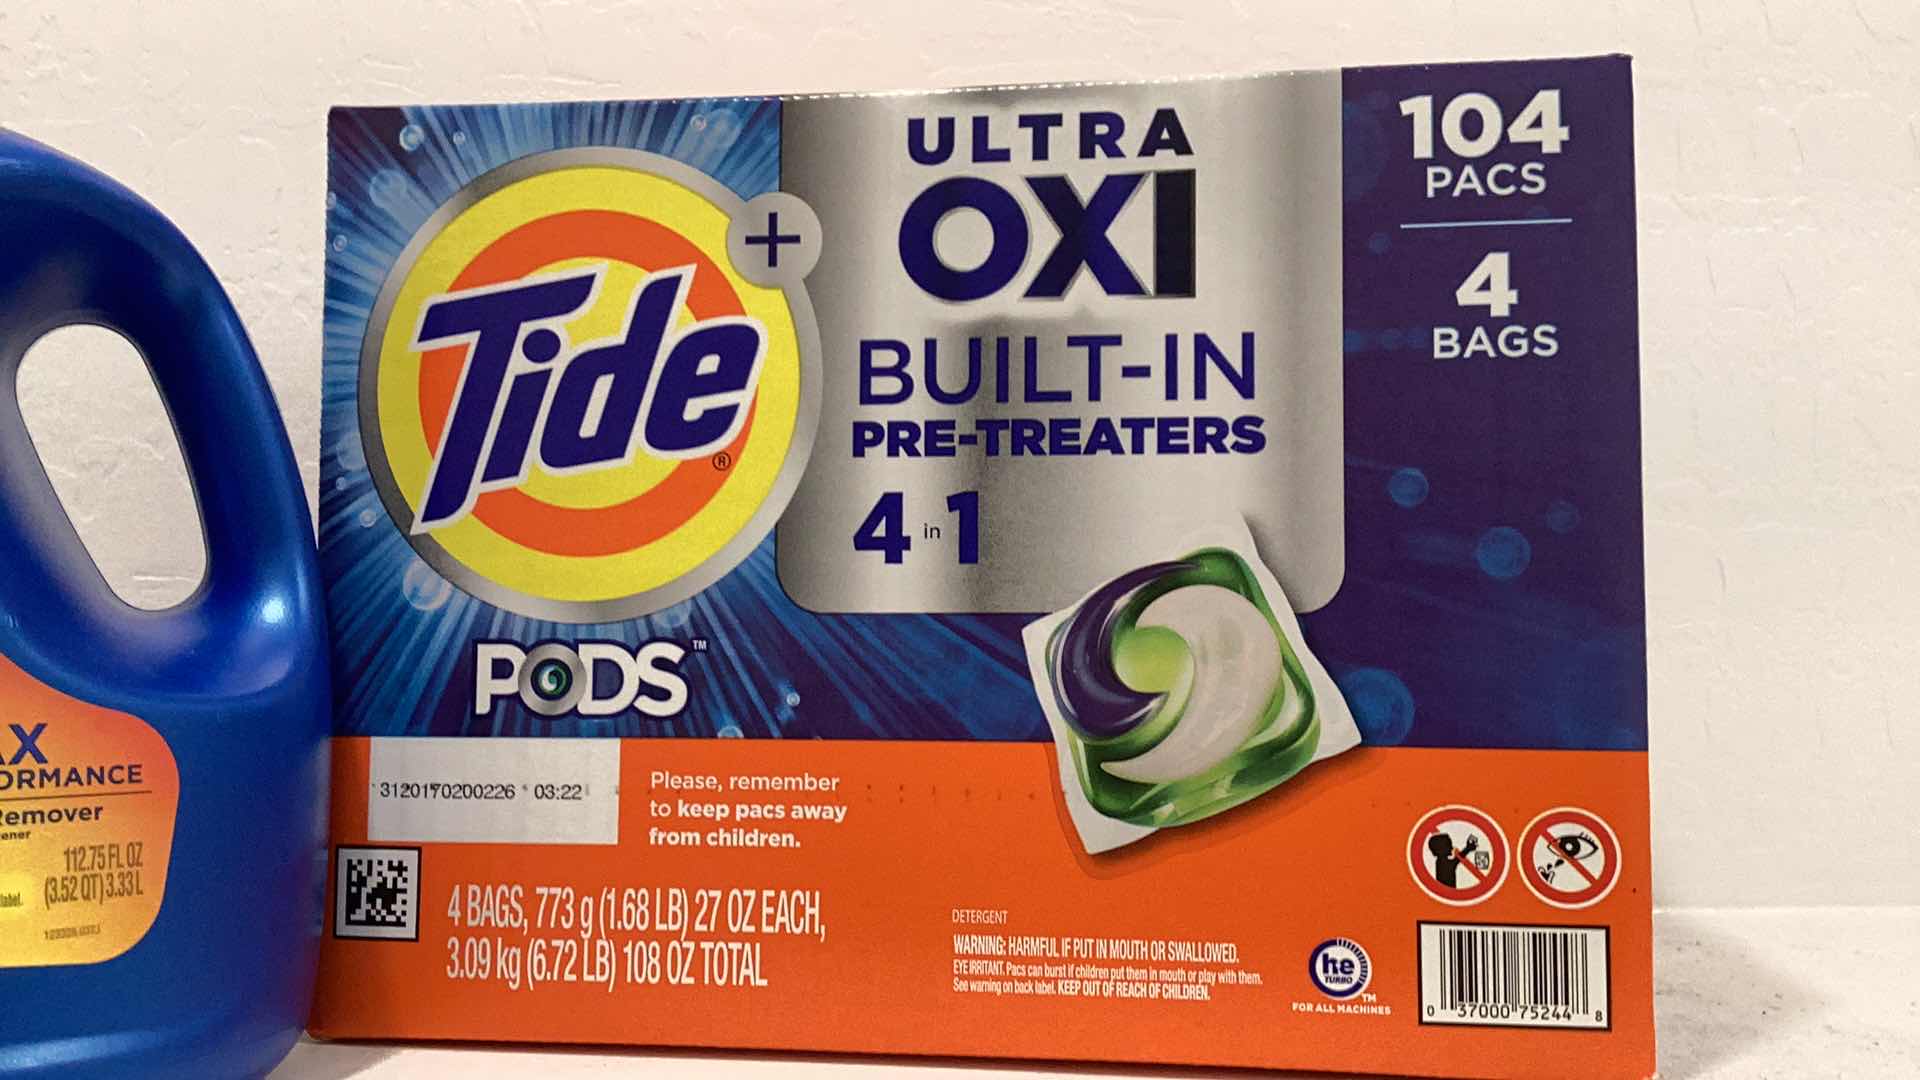 Photo 3 of CLOROX LAUNDRY DETERGENT LASTING FOR 82 LOADS AND TIDE PODS WITH 104 PACKS.